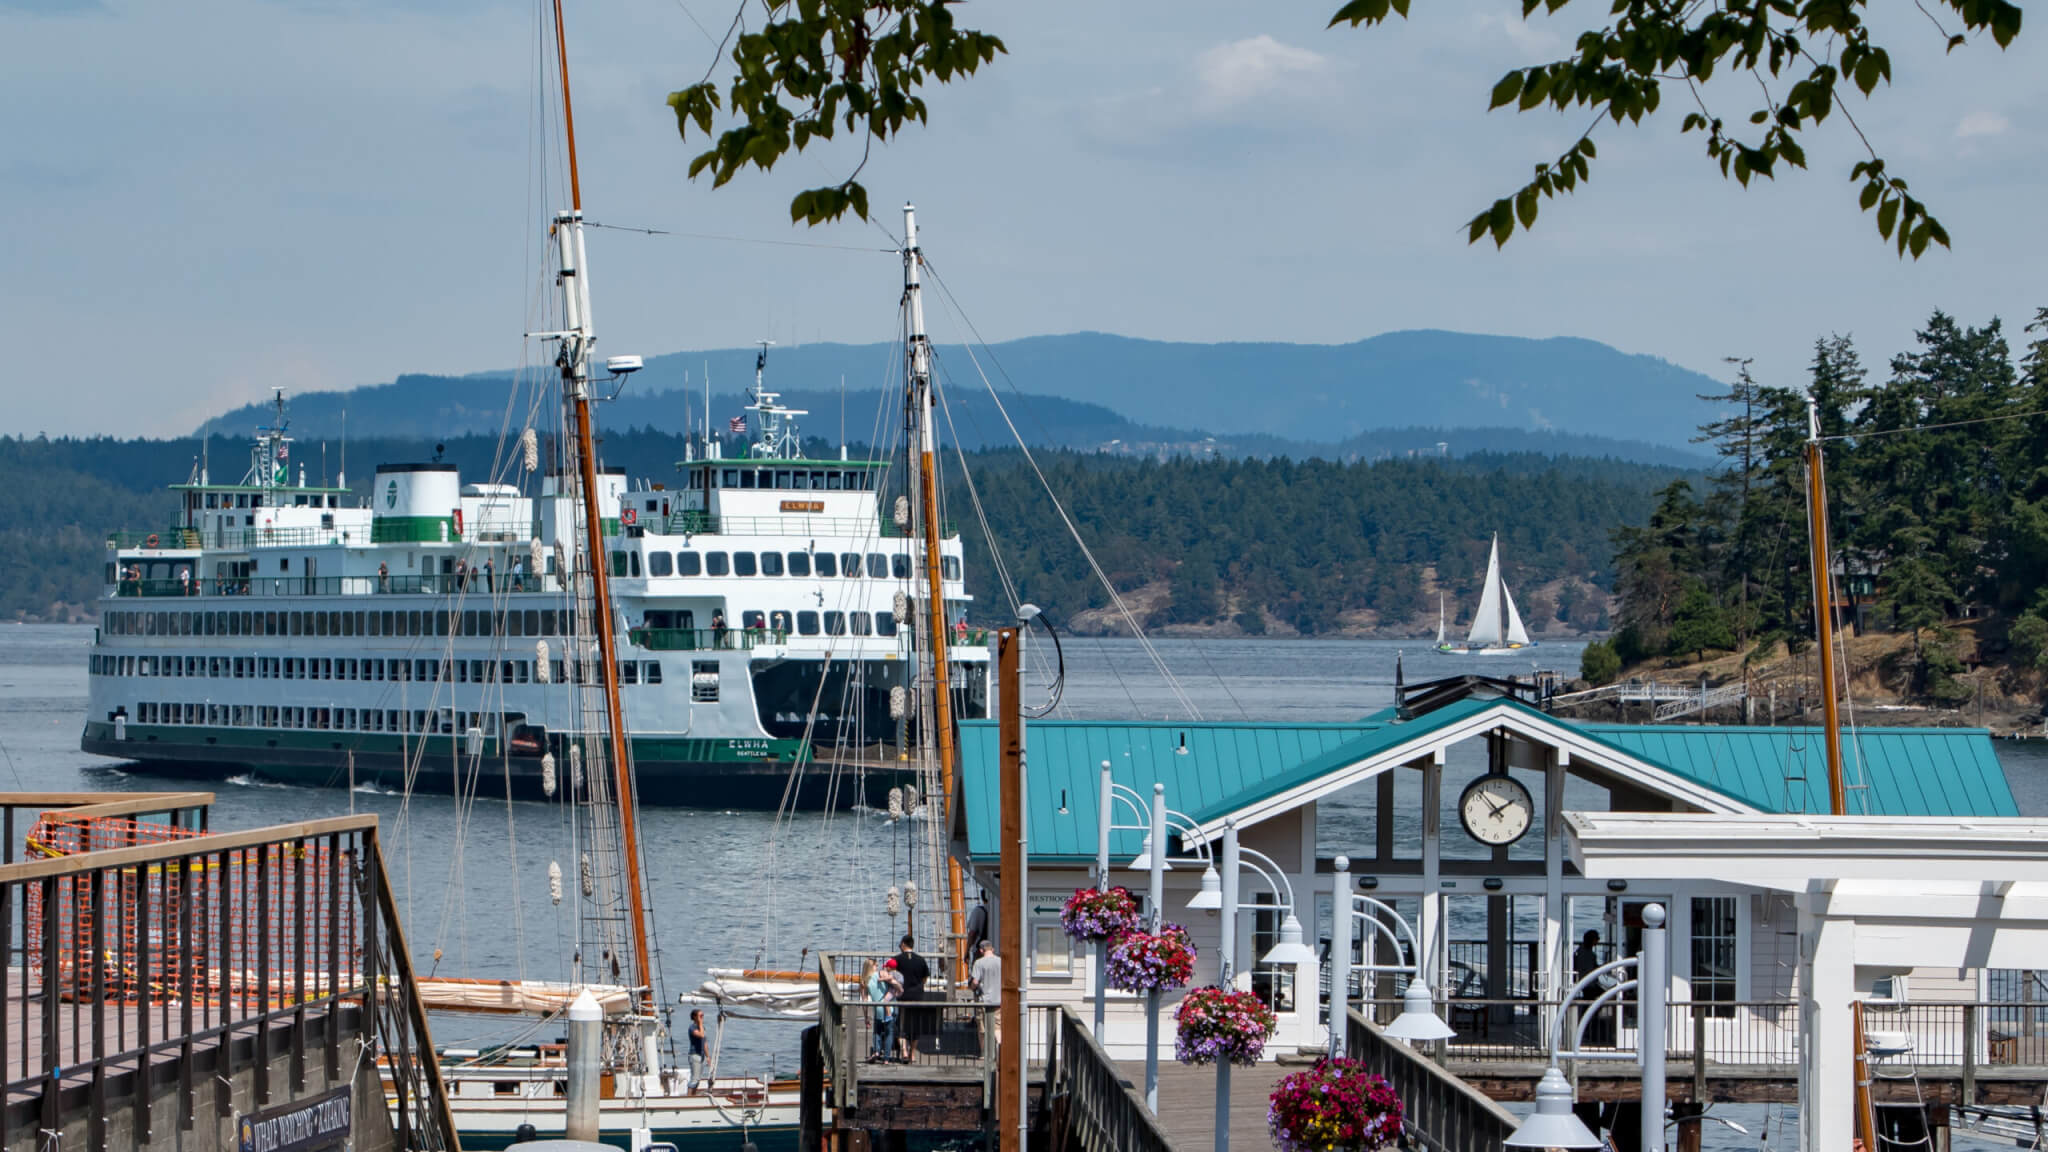 Washington State Ferry boat, "Elwha," departs dock at Friday Harbor, in the San Juan Islands in Washington State.